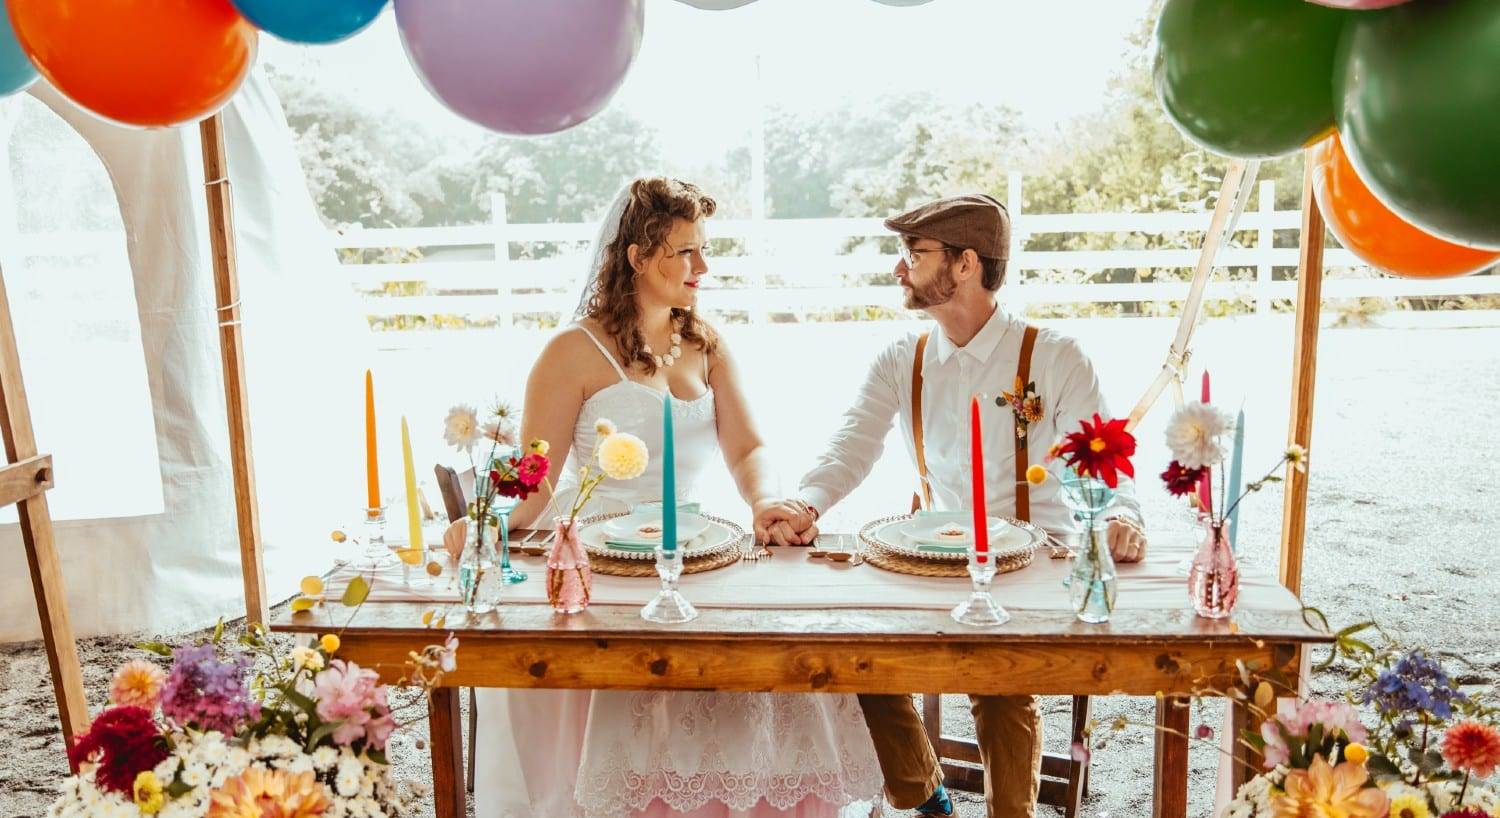 A bride and groom at a table for two surrounded by flowers and balloons